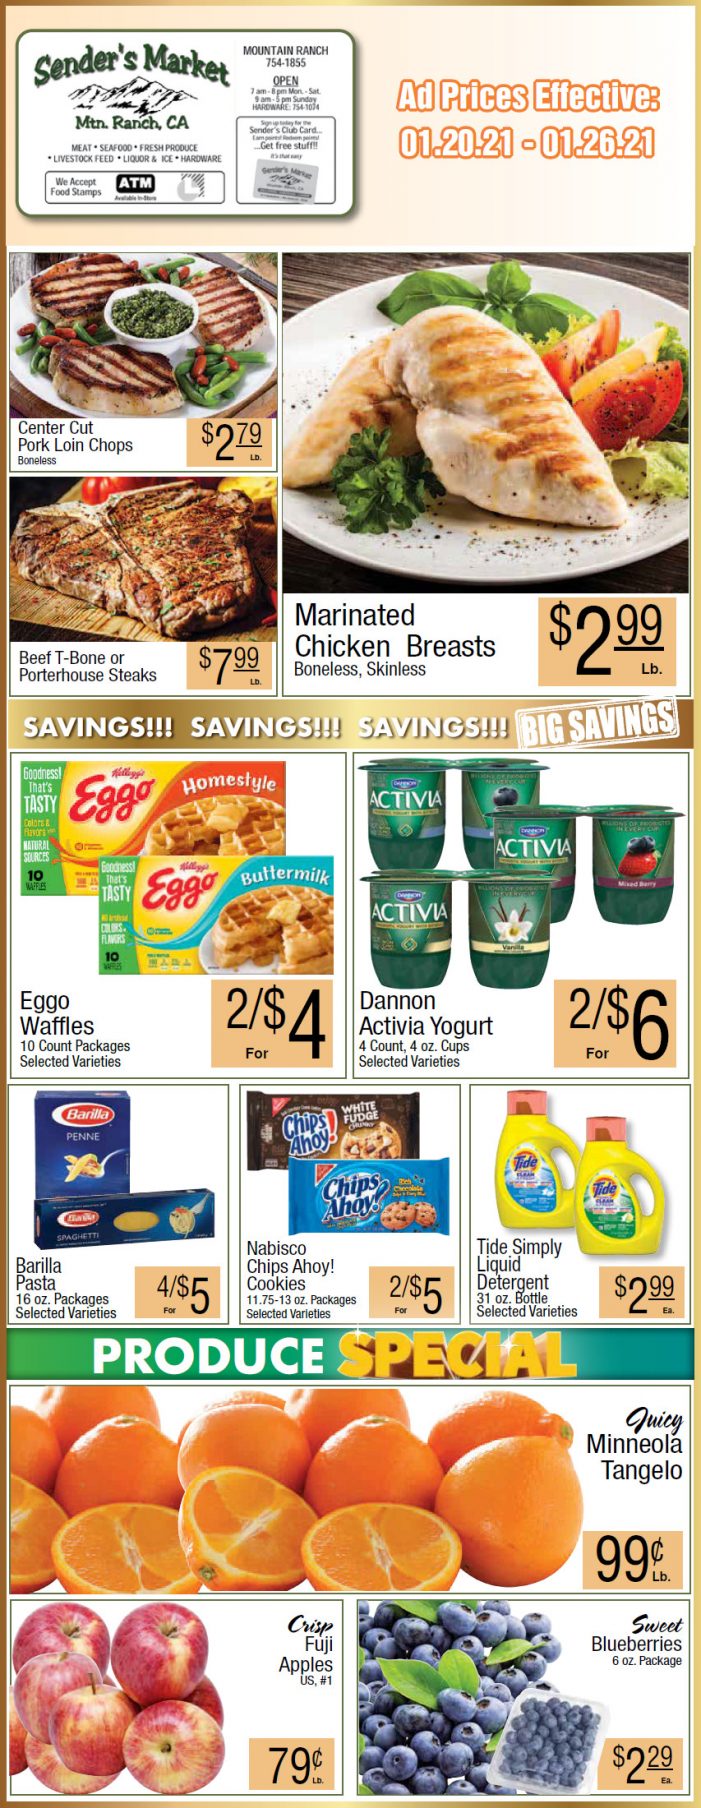 Sender’s Market’s Weekly Ad & Grocery Specials Through January 26th!  Shop Local & Save!